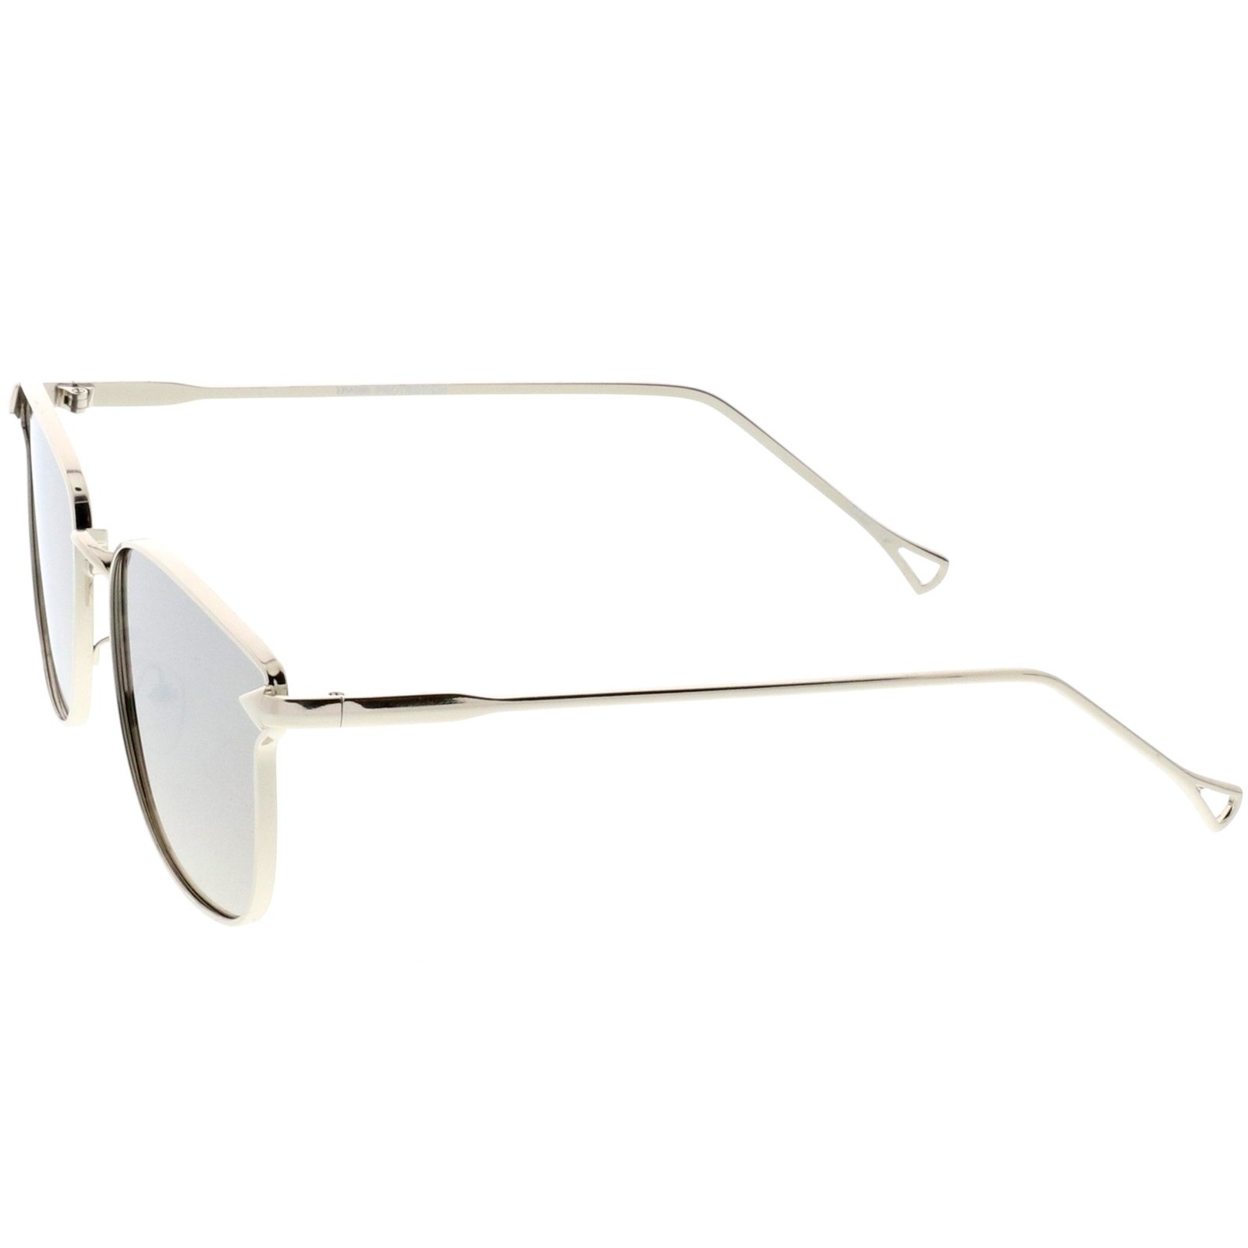 Modern Metal Square Sunglasses With Mirrored Flat Lenses And Slim Hook Arms 55mm - Gold / Pink Mirror